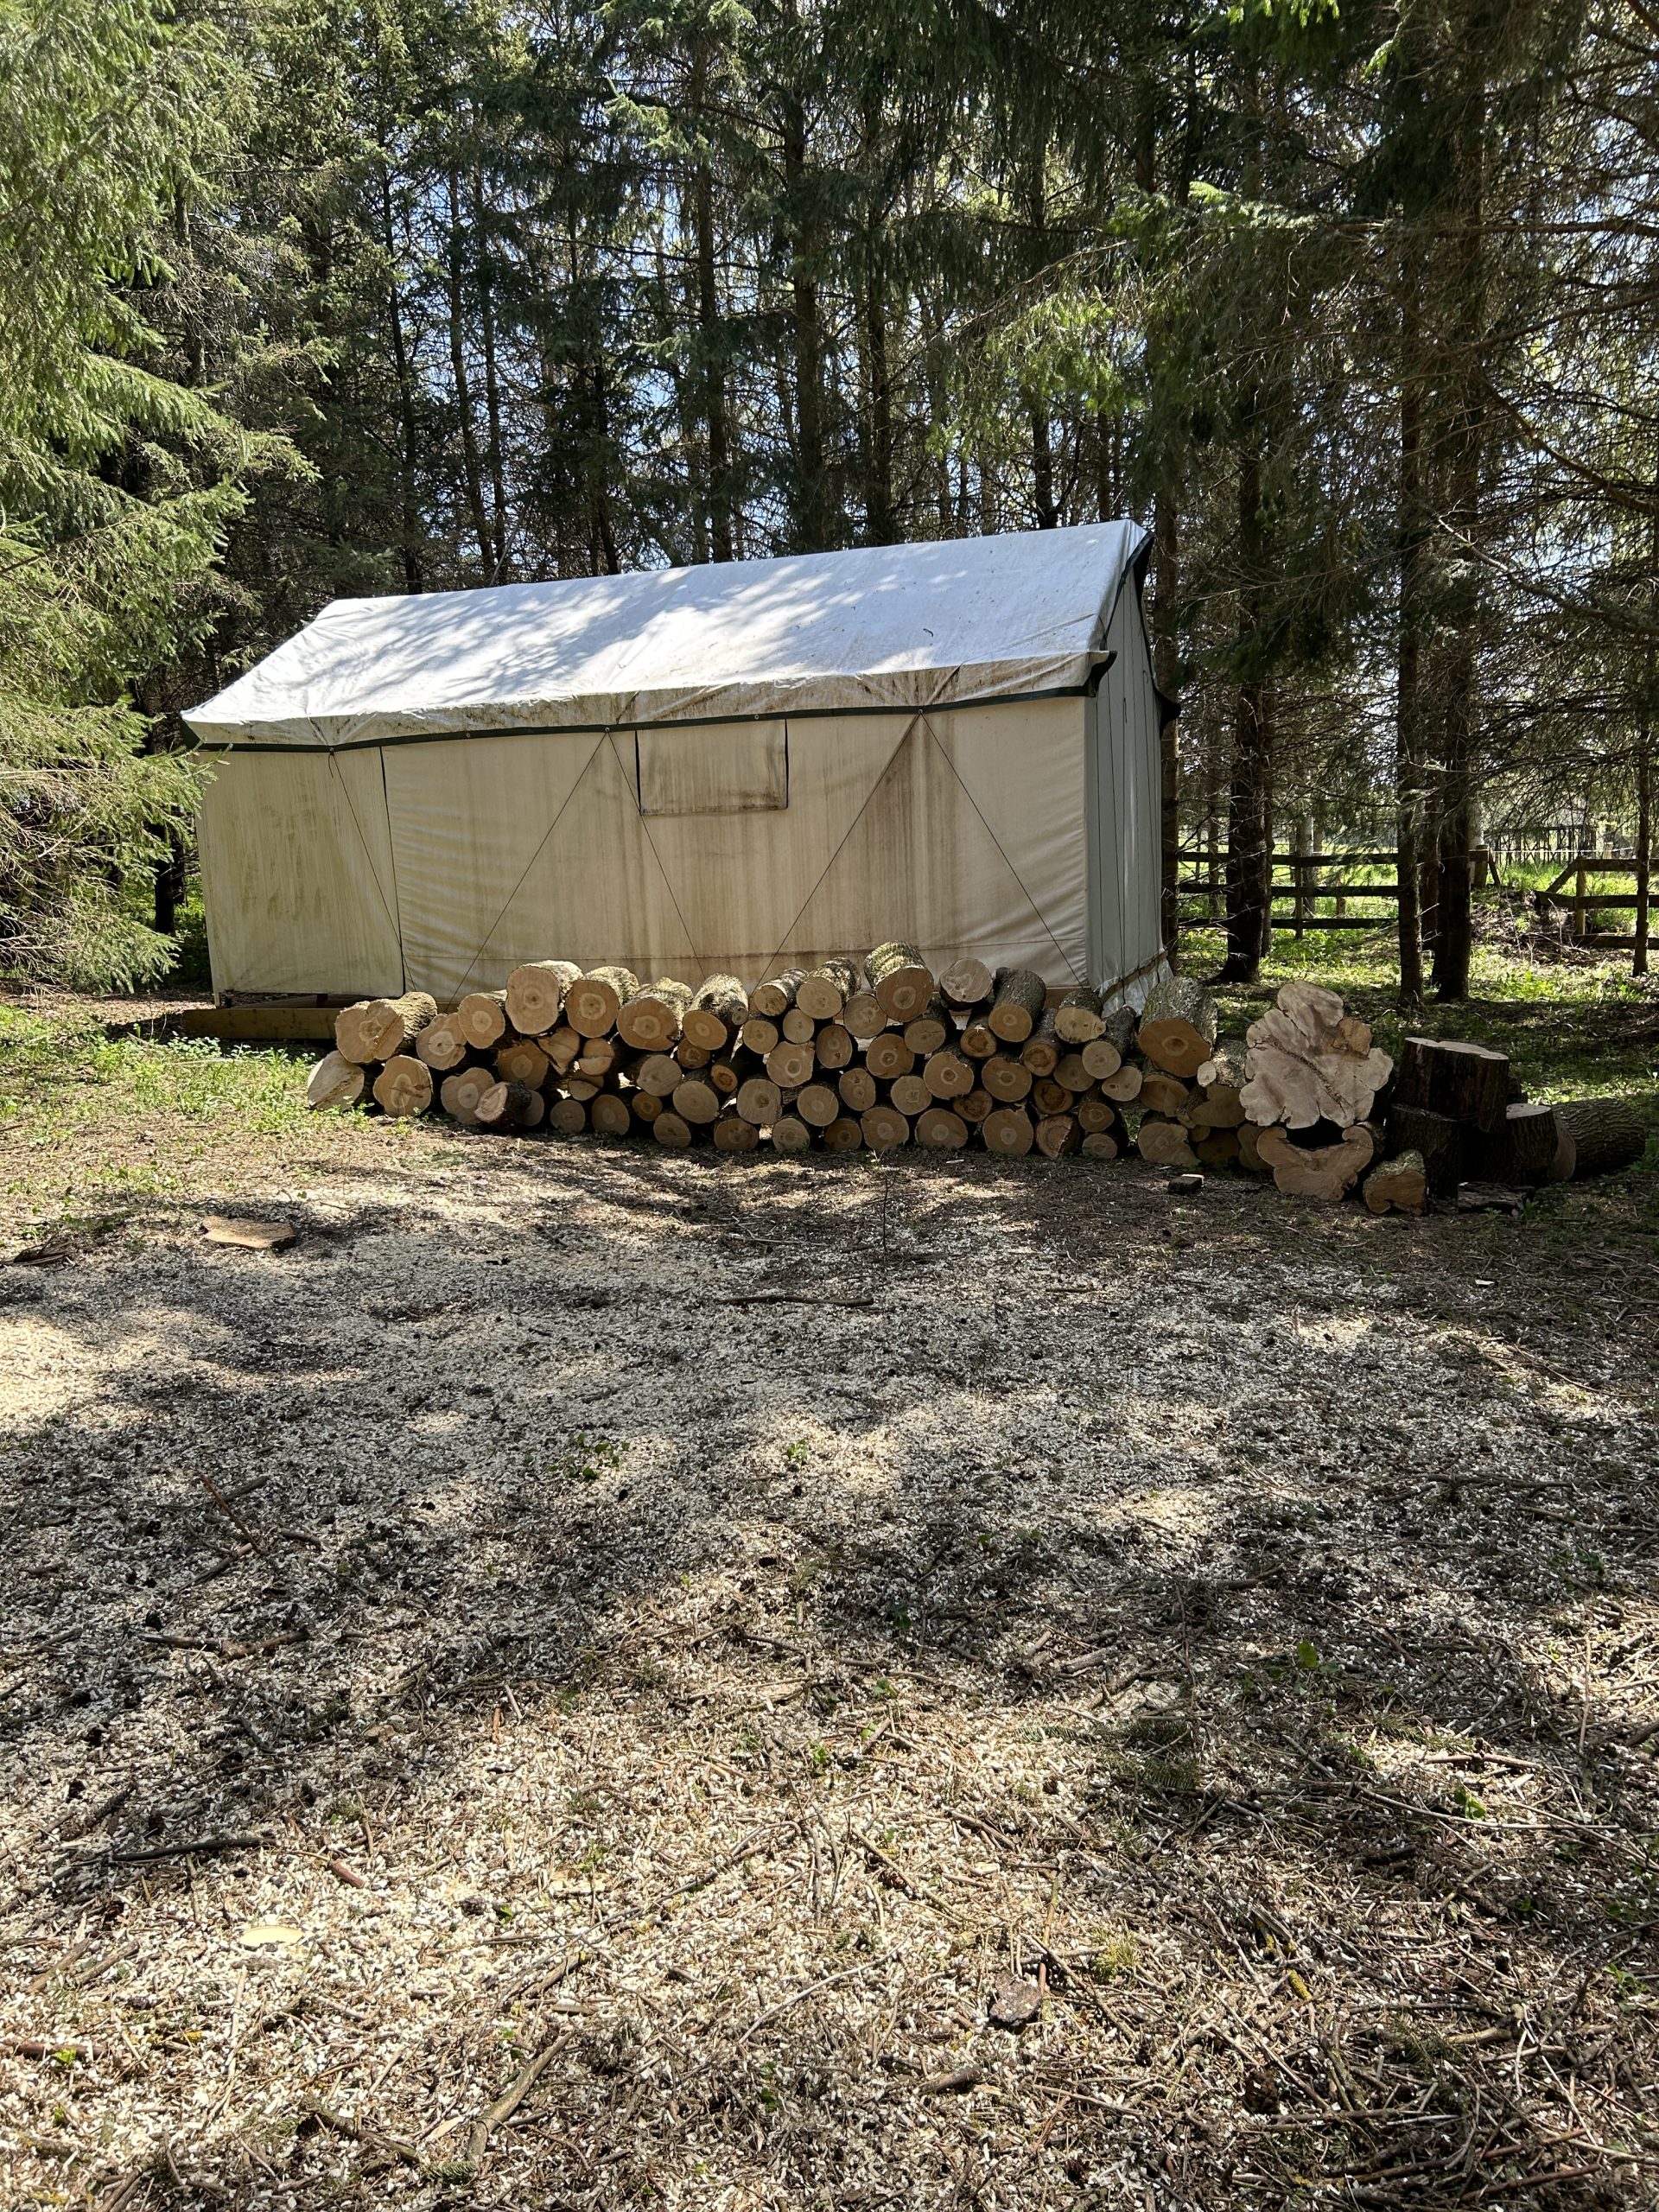 The Elora tent after a tree cutting, with stacked wood next to it on a sunny spring day.